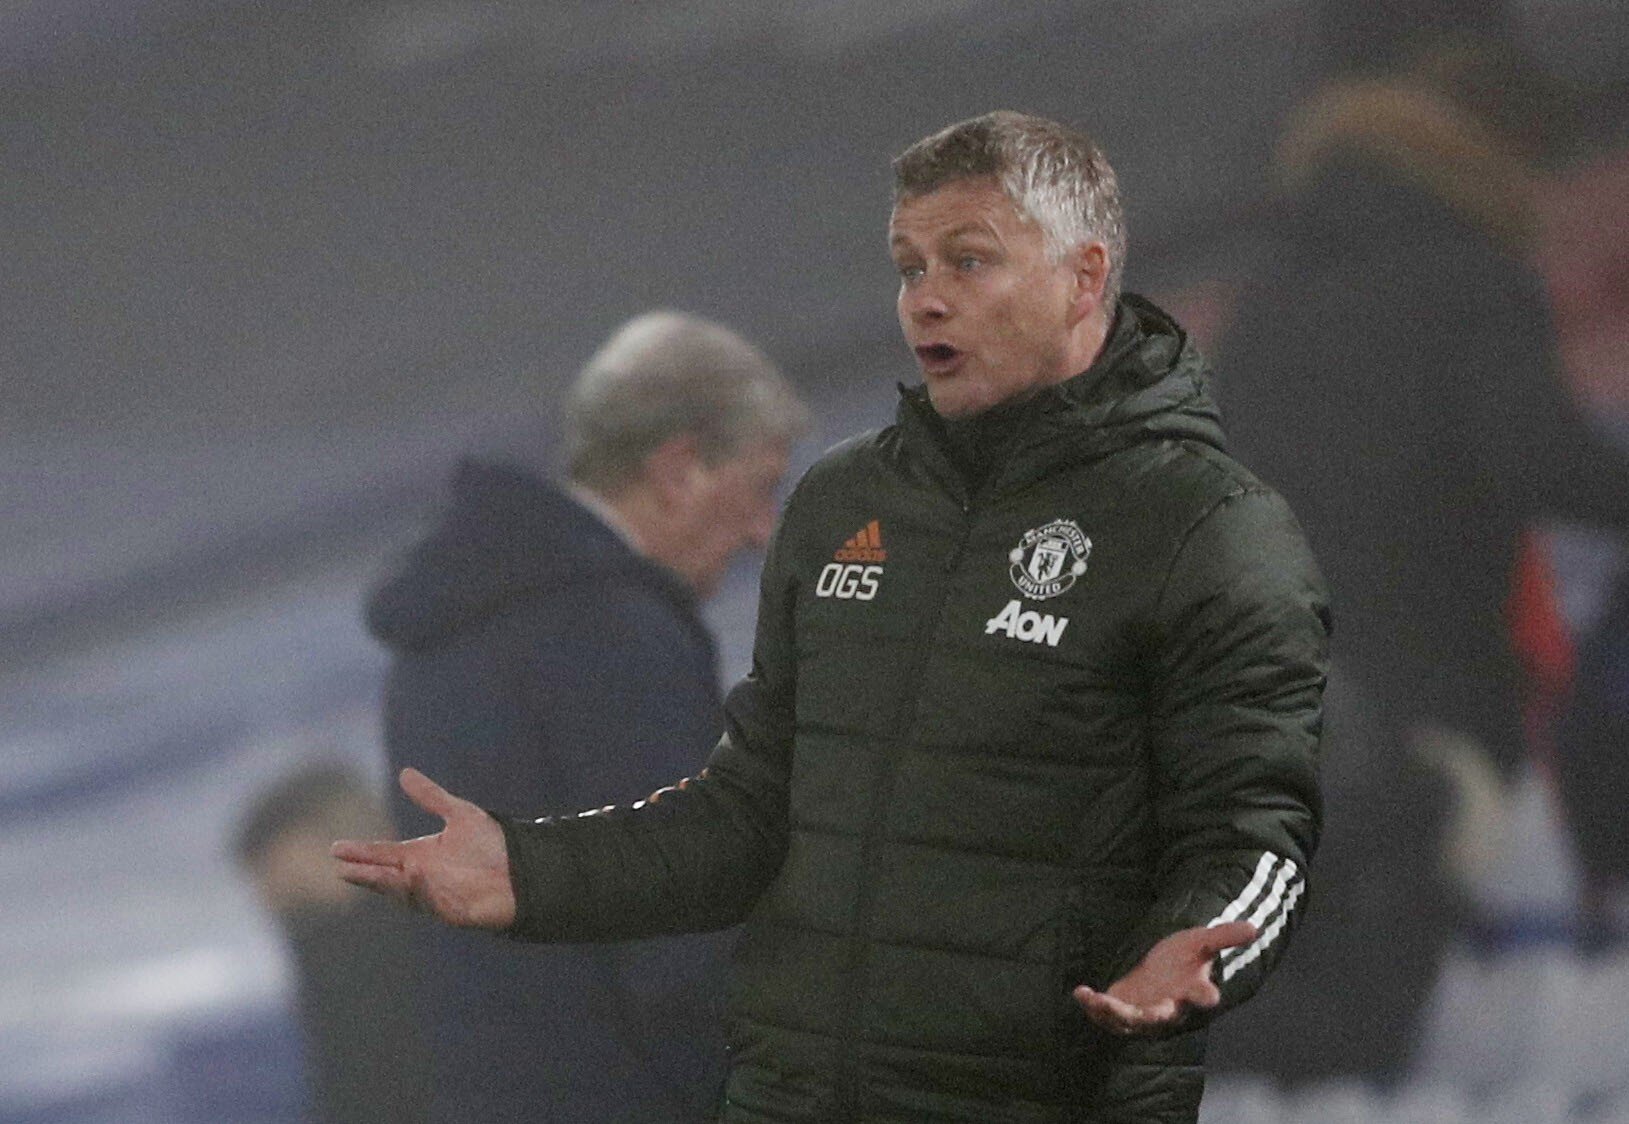 Ole Gunnar Solskjaer’s Manchester United side remain second in the Premier League table despite a poor run of form. Photo: Reuters